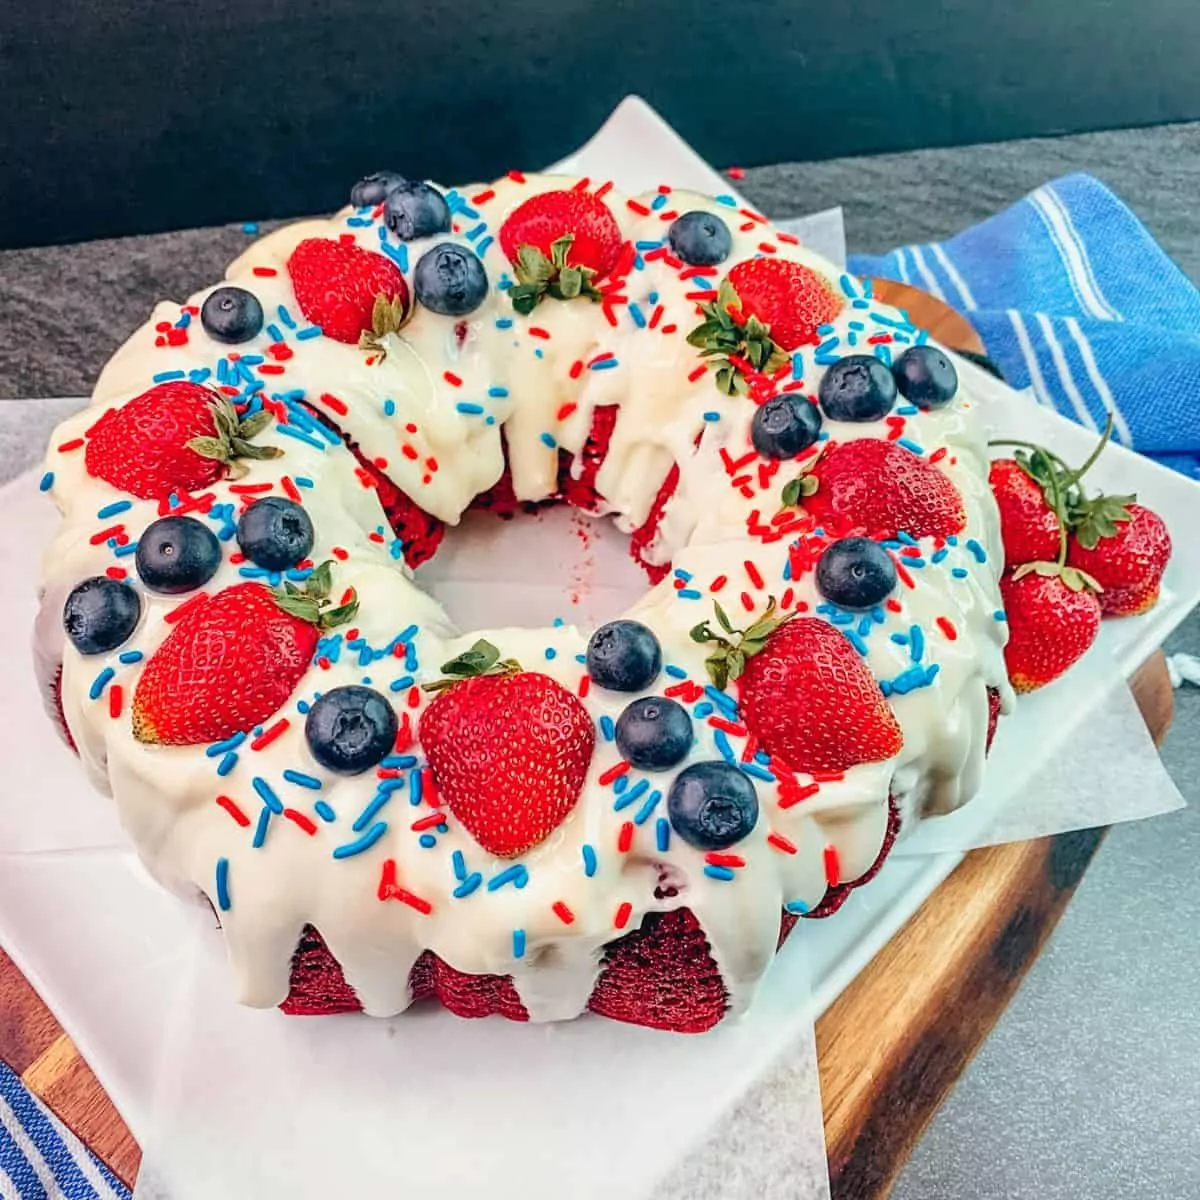 patriotic cake decorated with strawberries, blueberries and sprinkles.